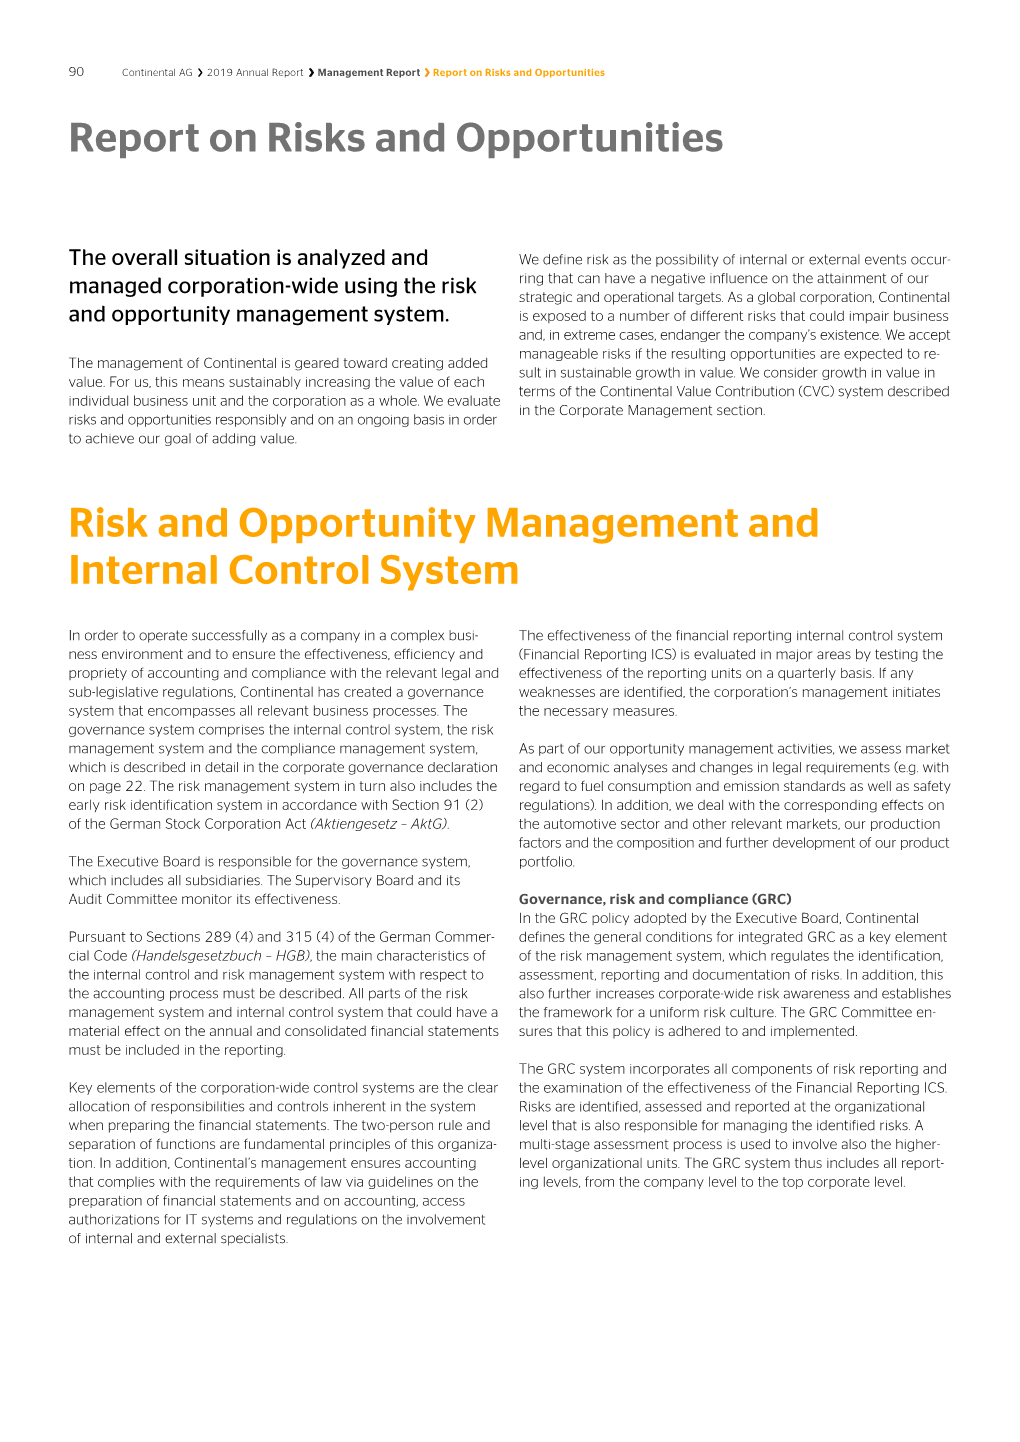 Risk and Opportunity Management and Internal Control System Report